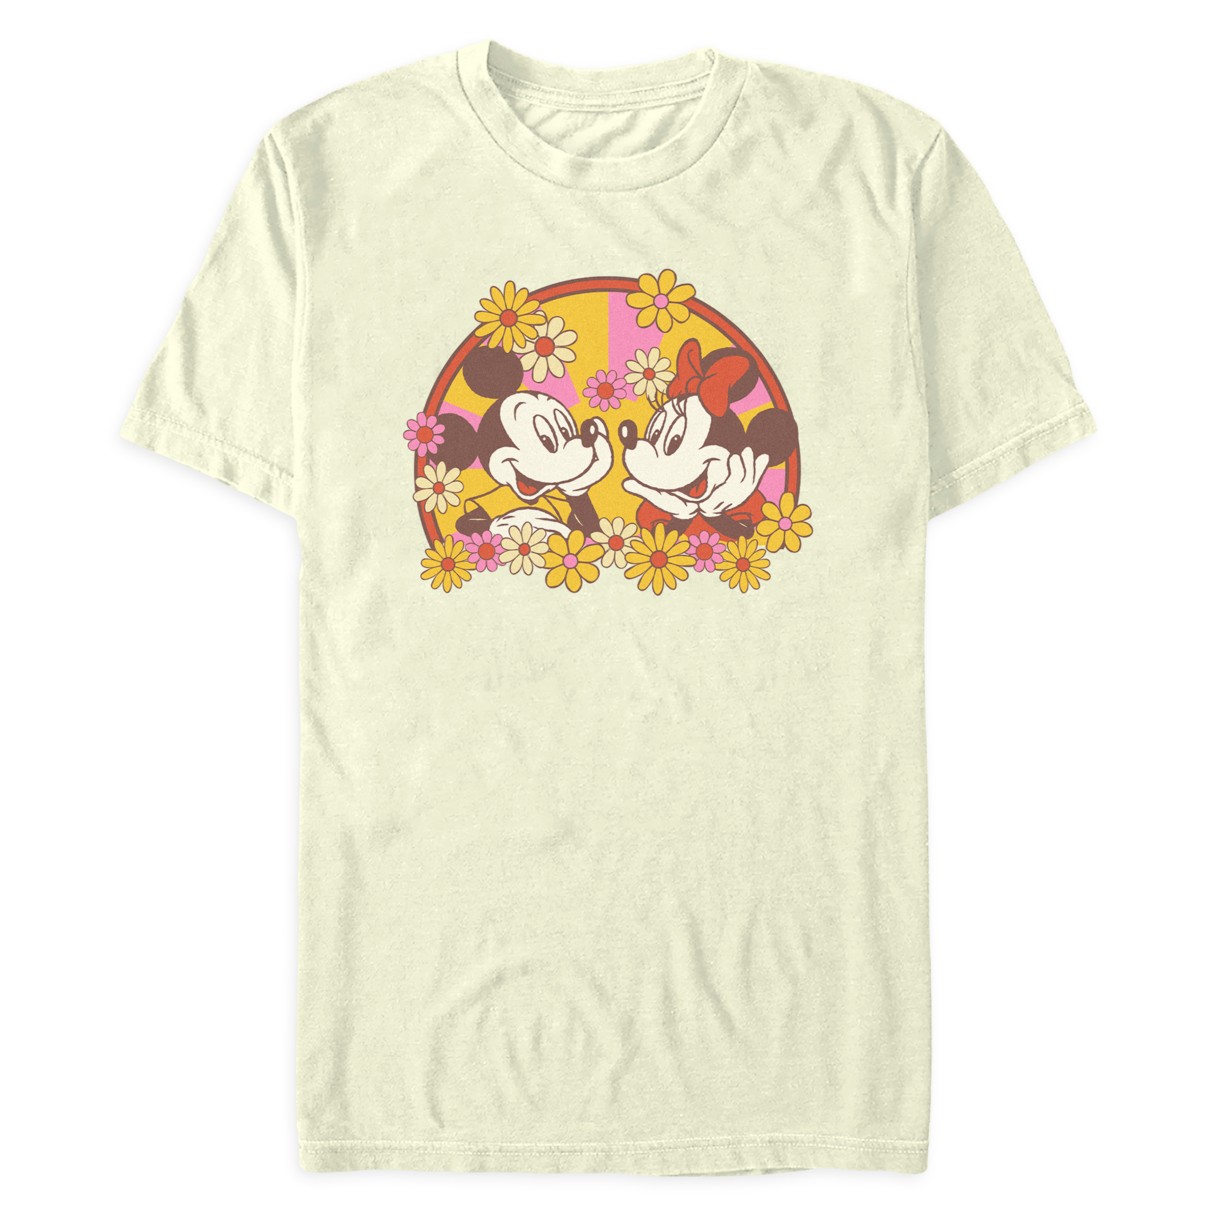 Mickey and Minnie Mouse Floral T-Shirt for Adults